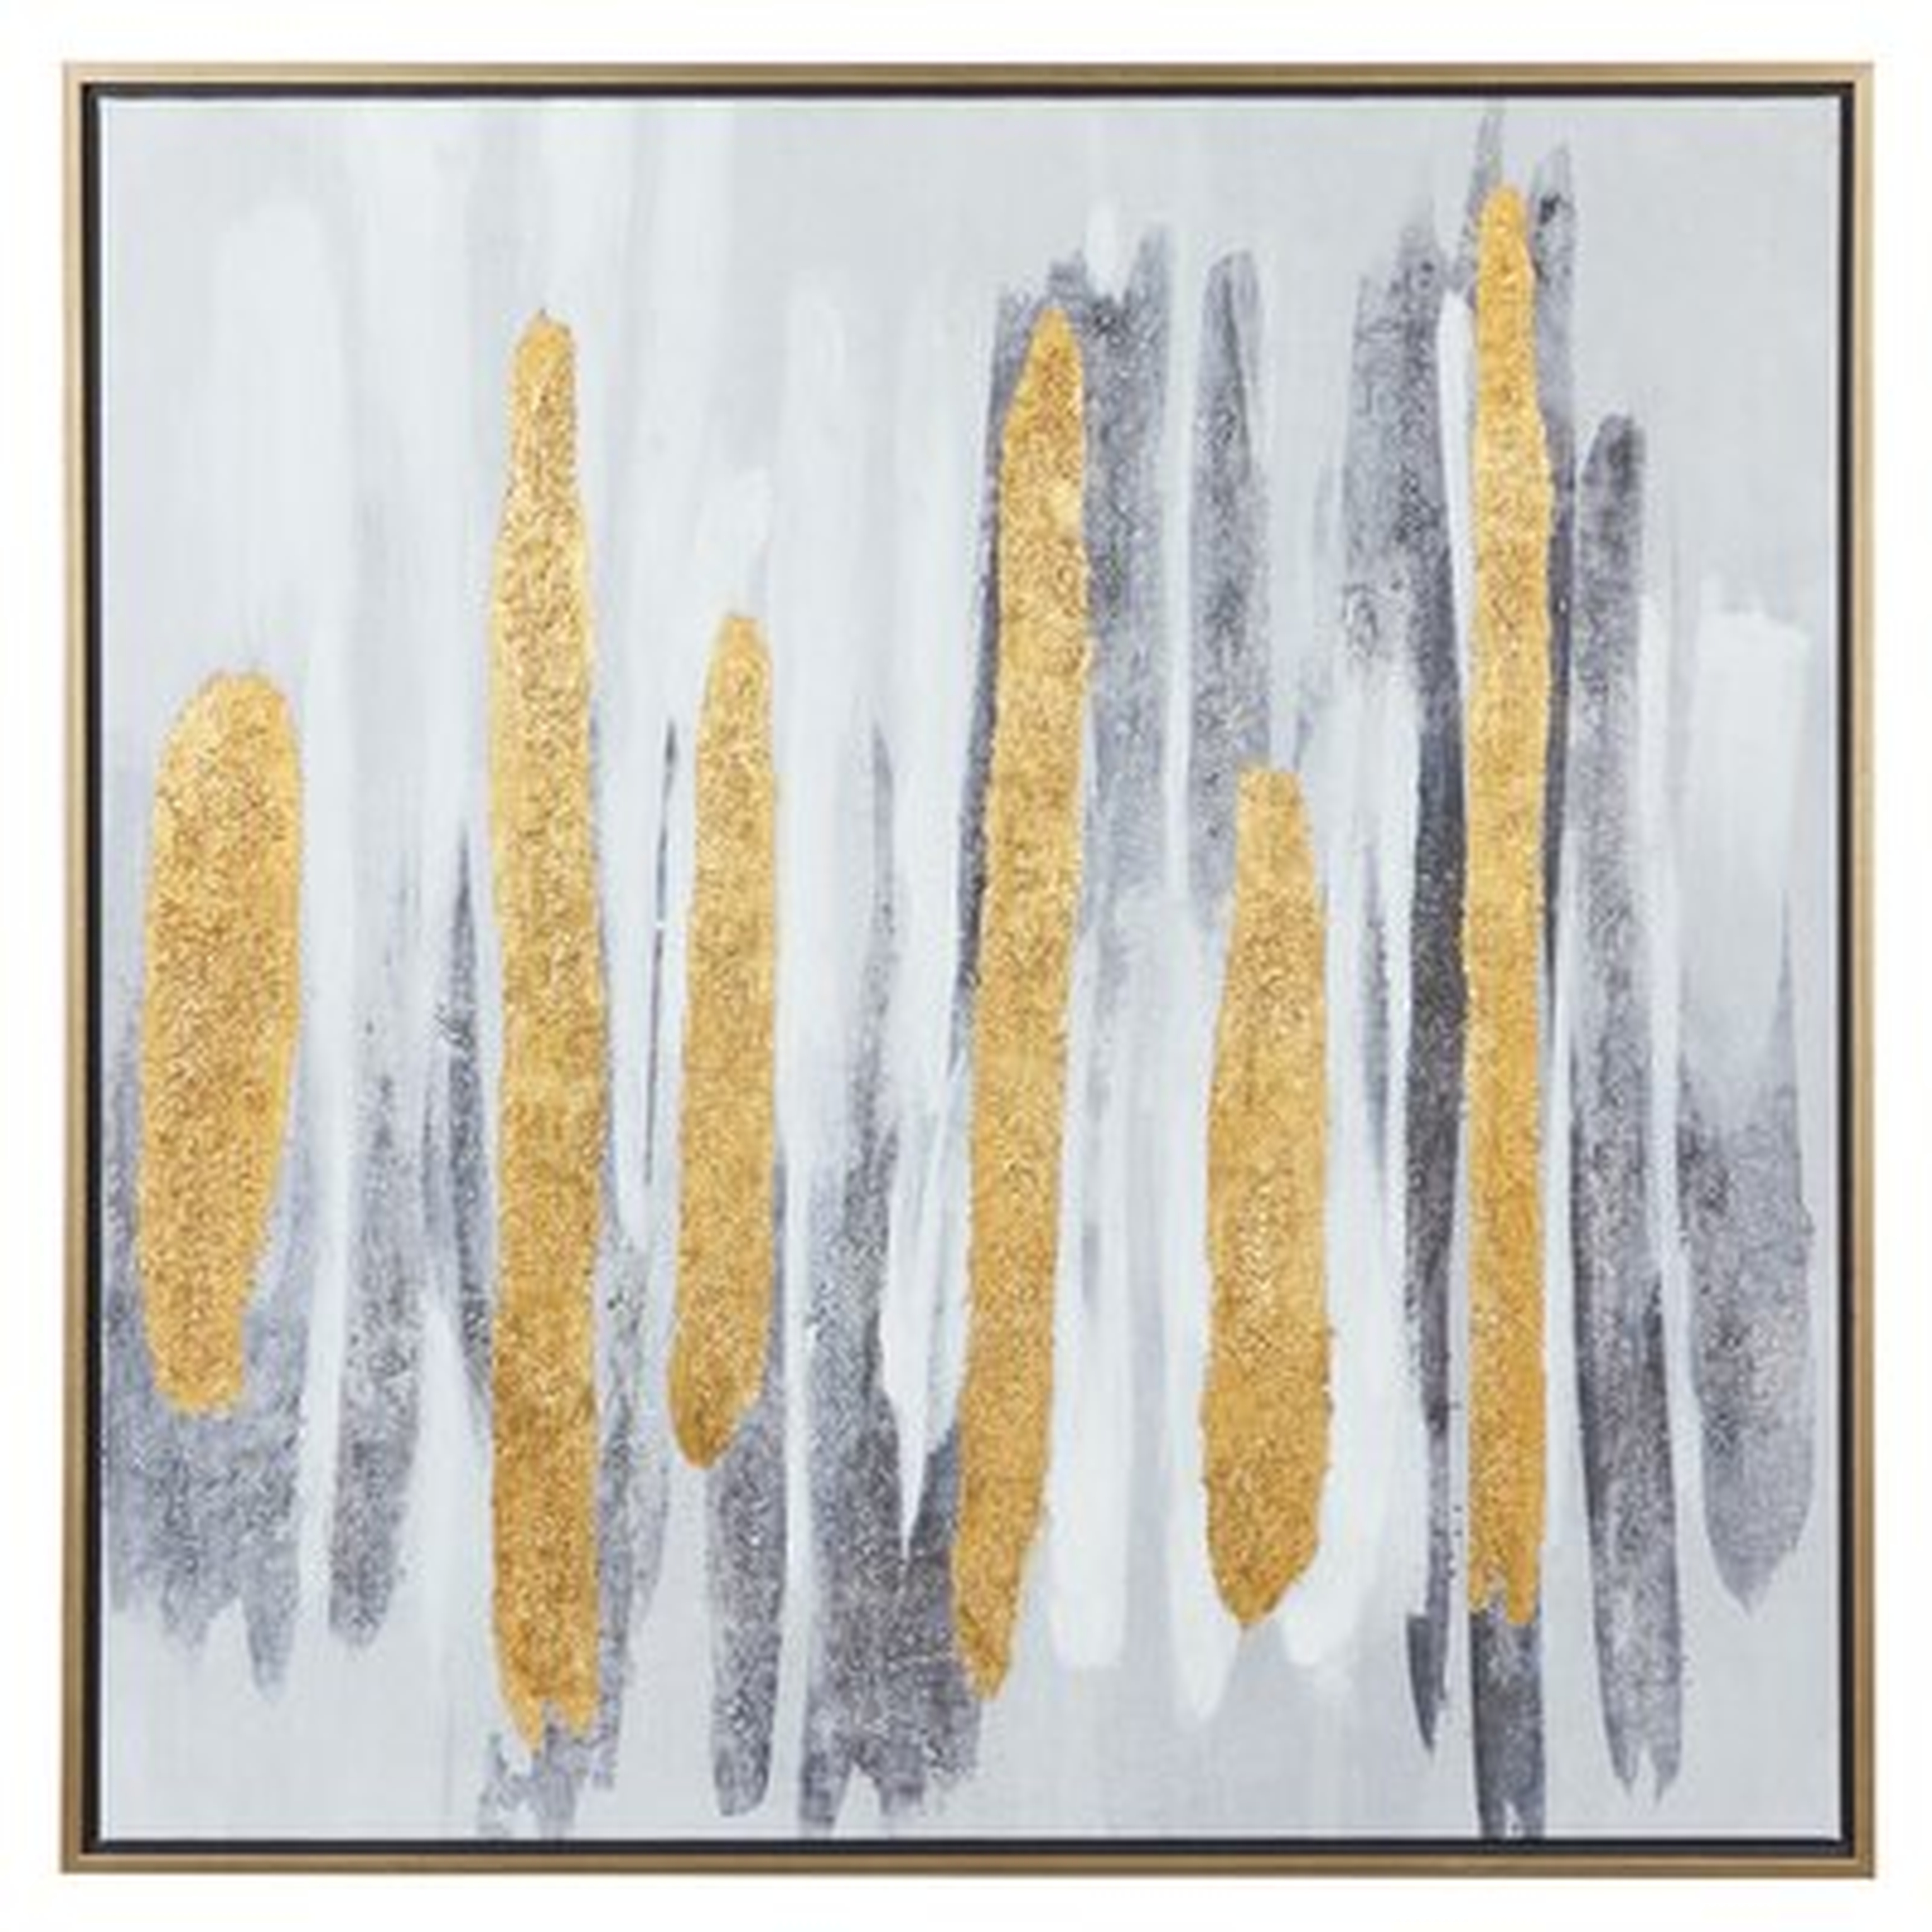 Square Gold And Gray Brushed Stripe Abstract Canvas Wall Art With Gold Metal Frame, 40" X 40" - Floater Frame Painting on Canvas - Wayfair